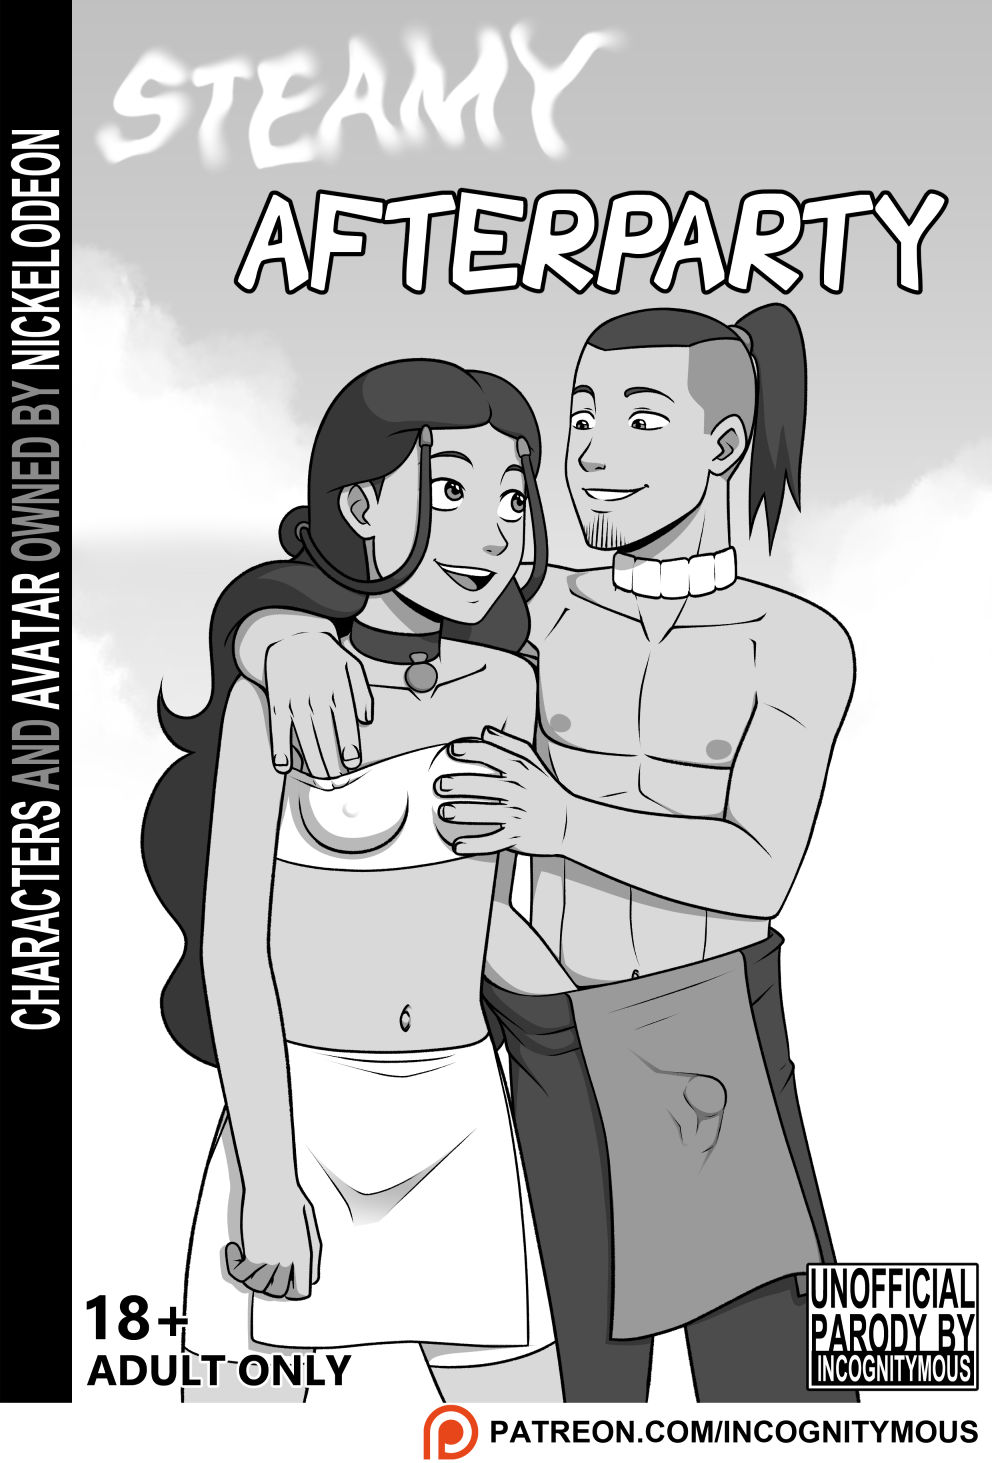 Steamy afterparty porn comic picture 1